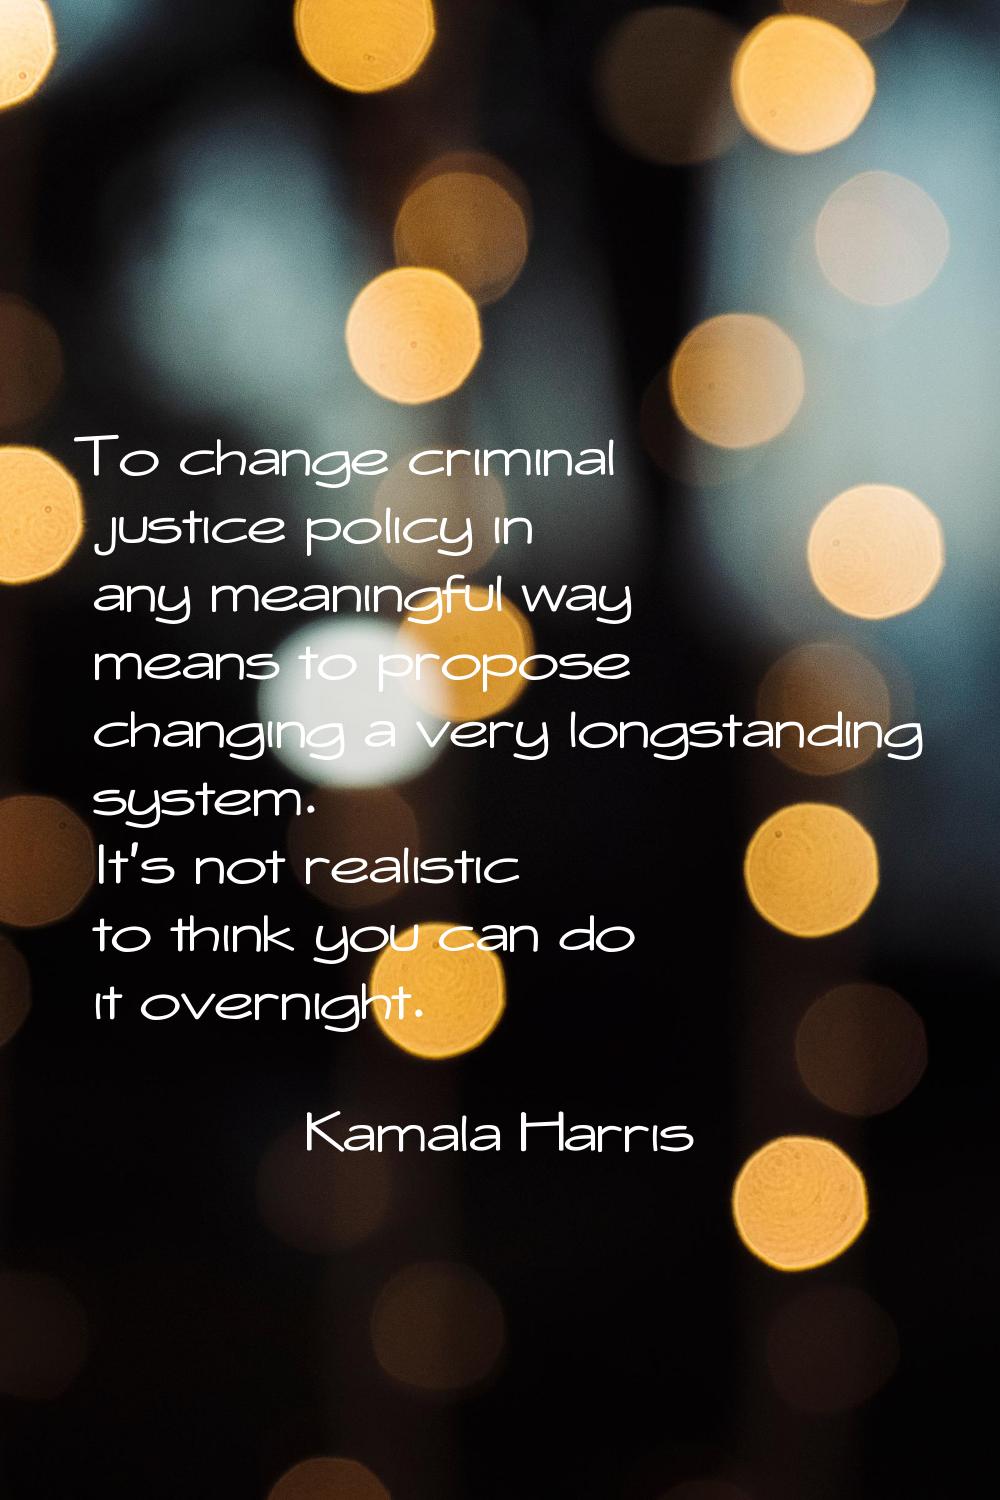 To change criminal justice policy in any meaningful way means to propose changing a very longstandi